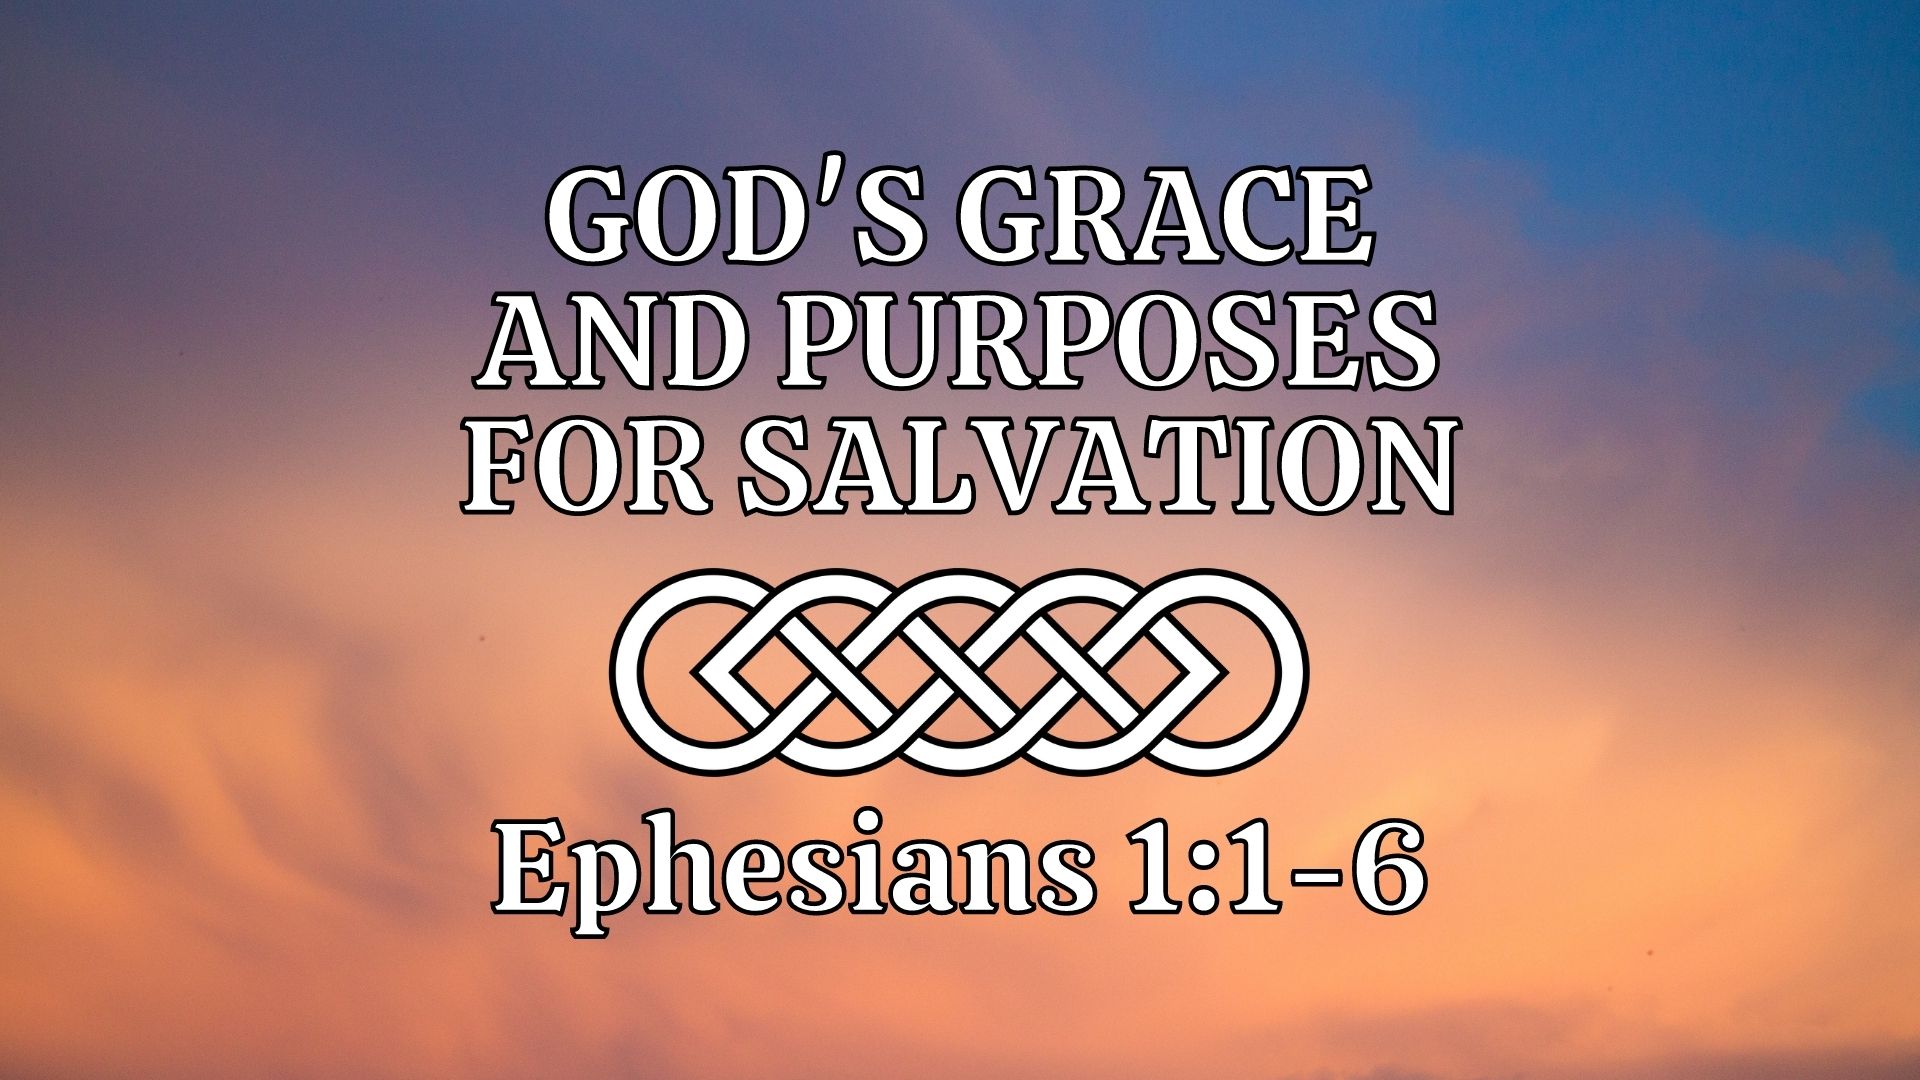 God's Grace and Purposes for Salvation (Ephesians 1:1-6) Image